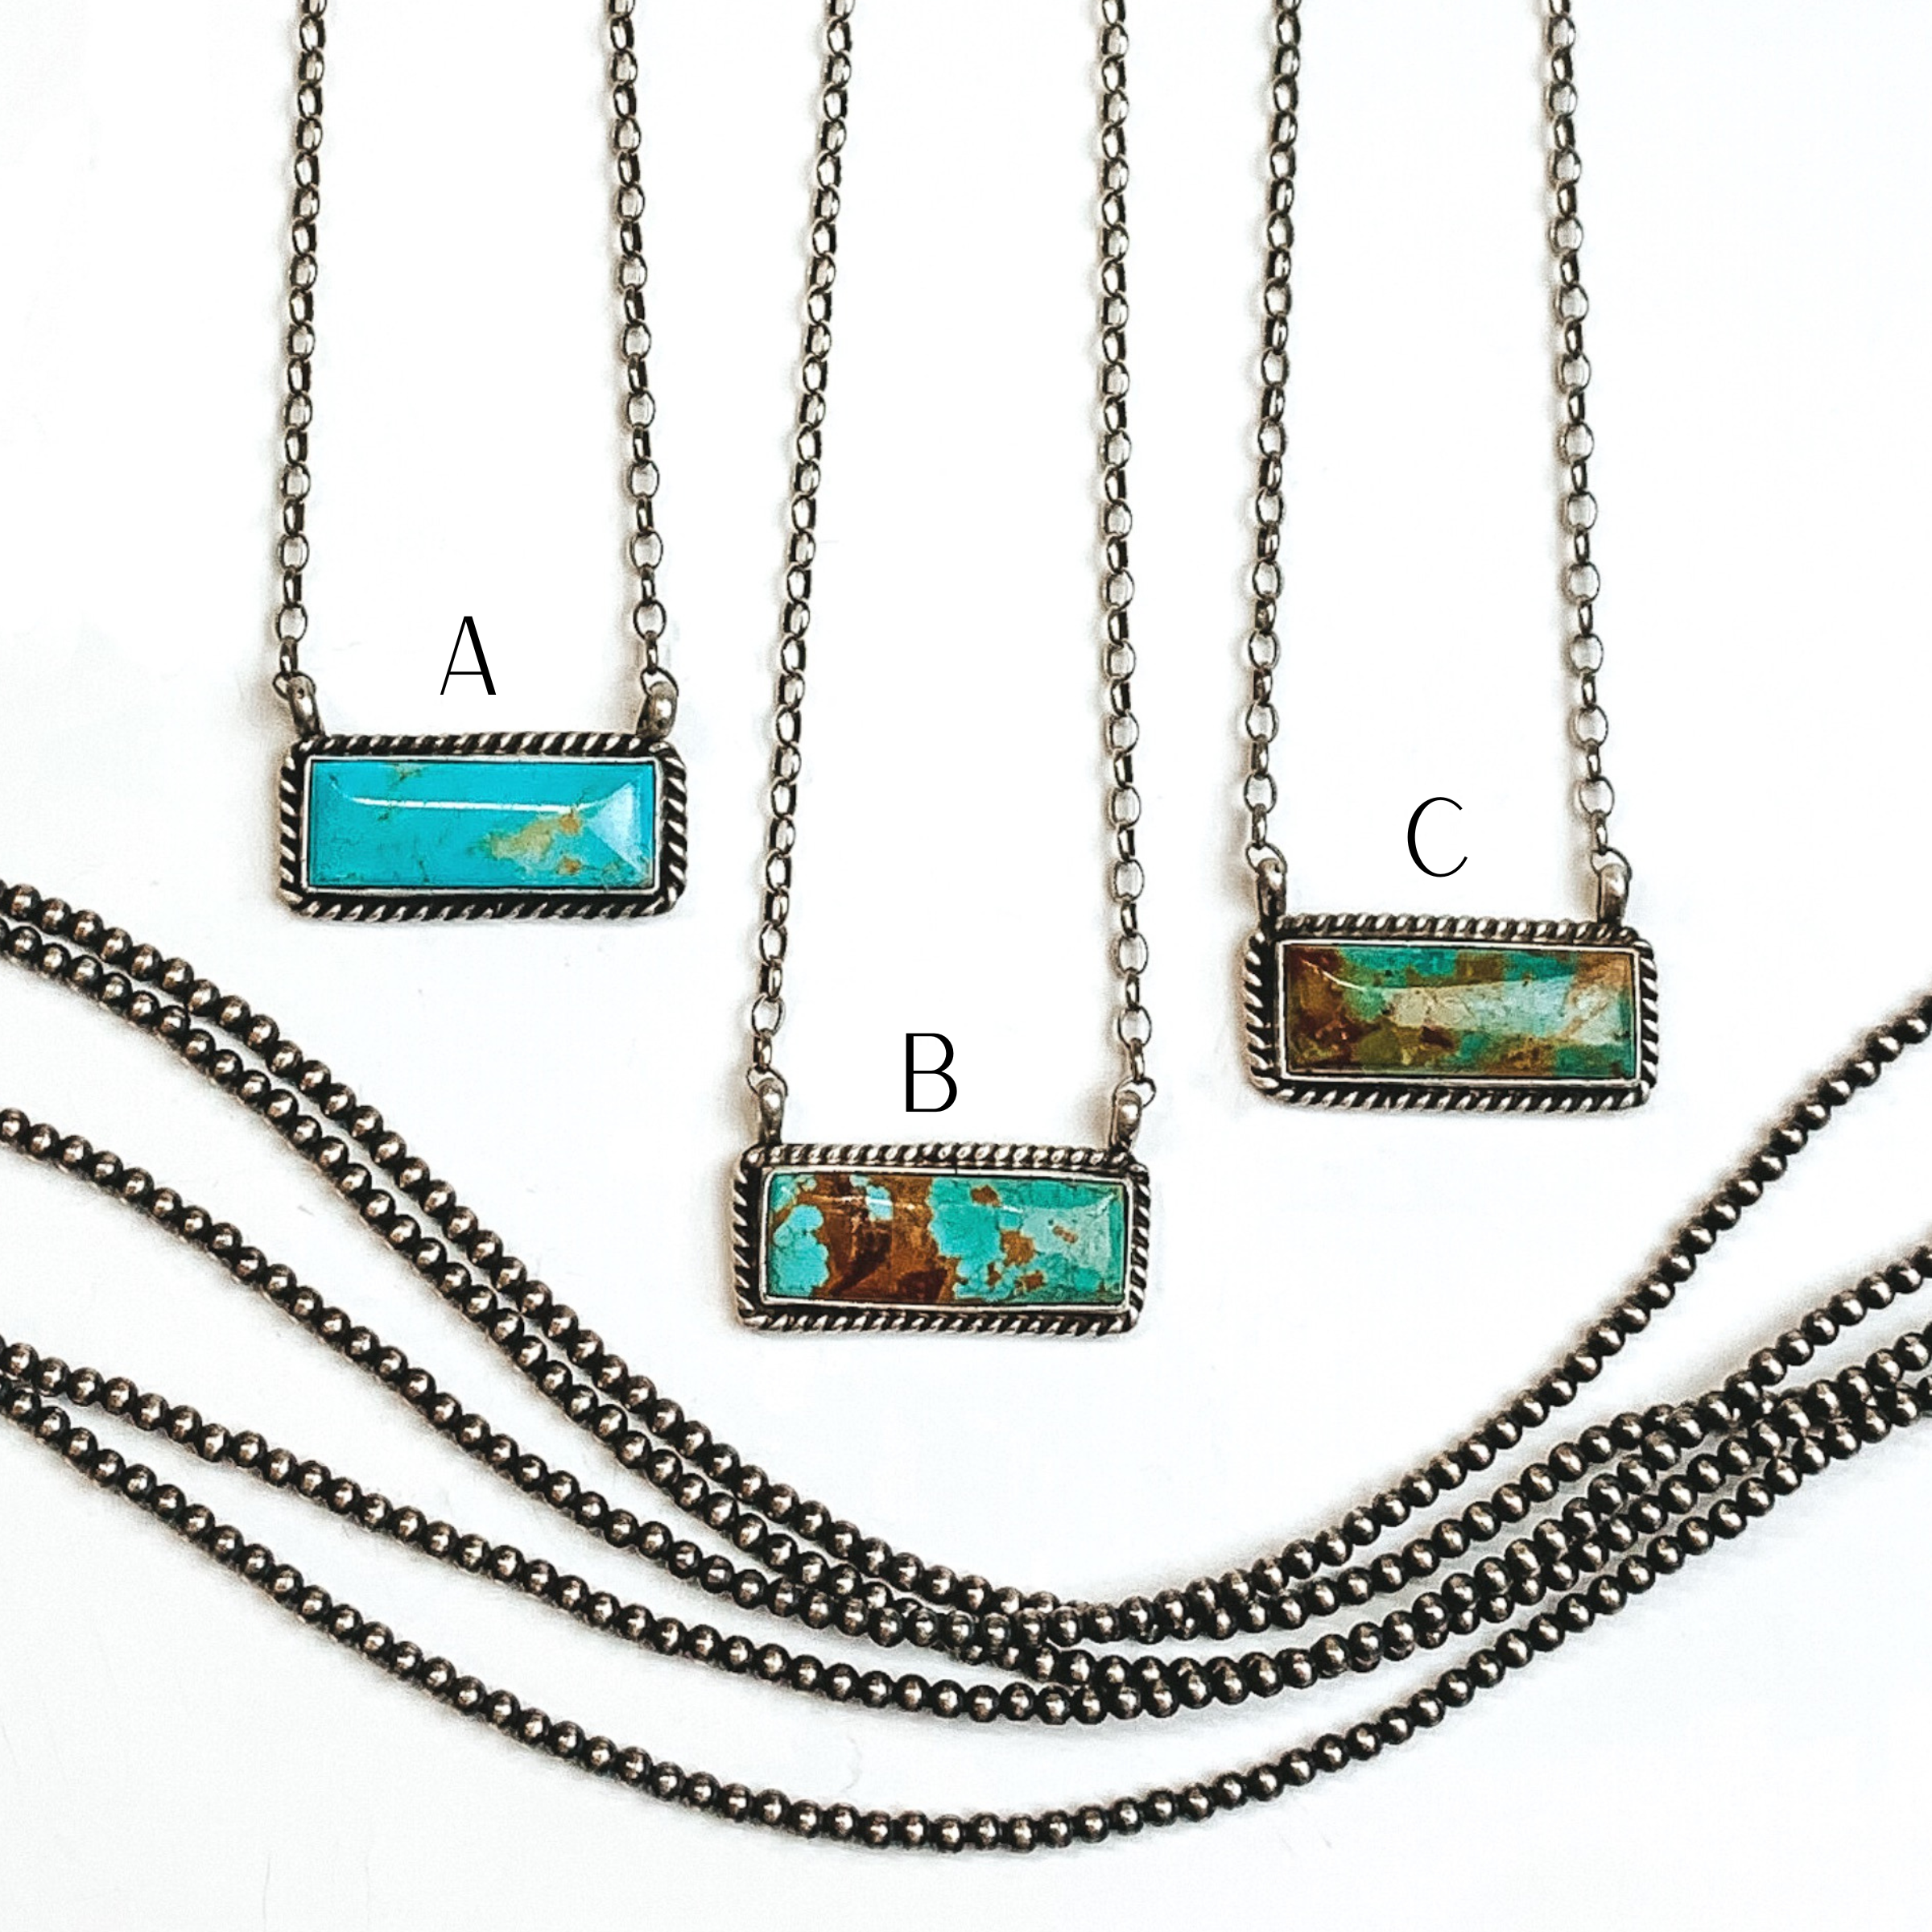 Augustine Largo | Navajo Handmade Sterling Silver Chain Necklace with Kingman Turquoise Bar - Giddy Up Glamour Boutique